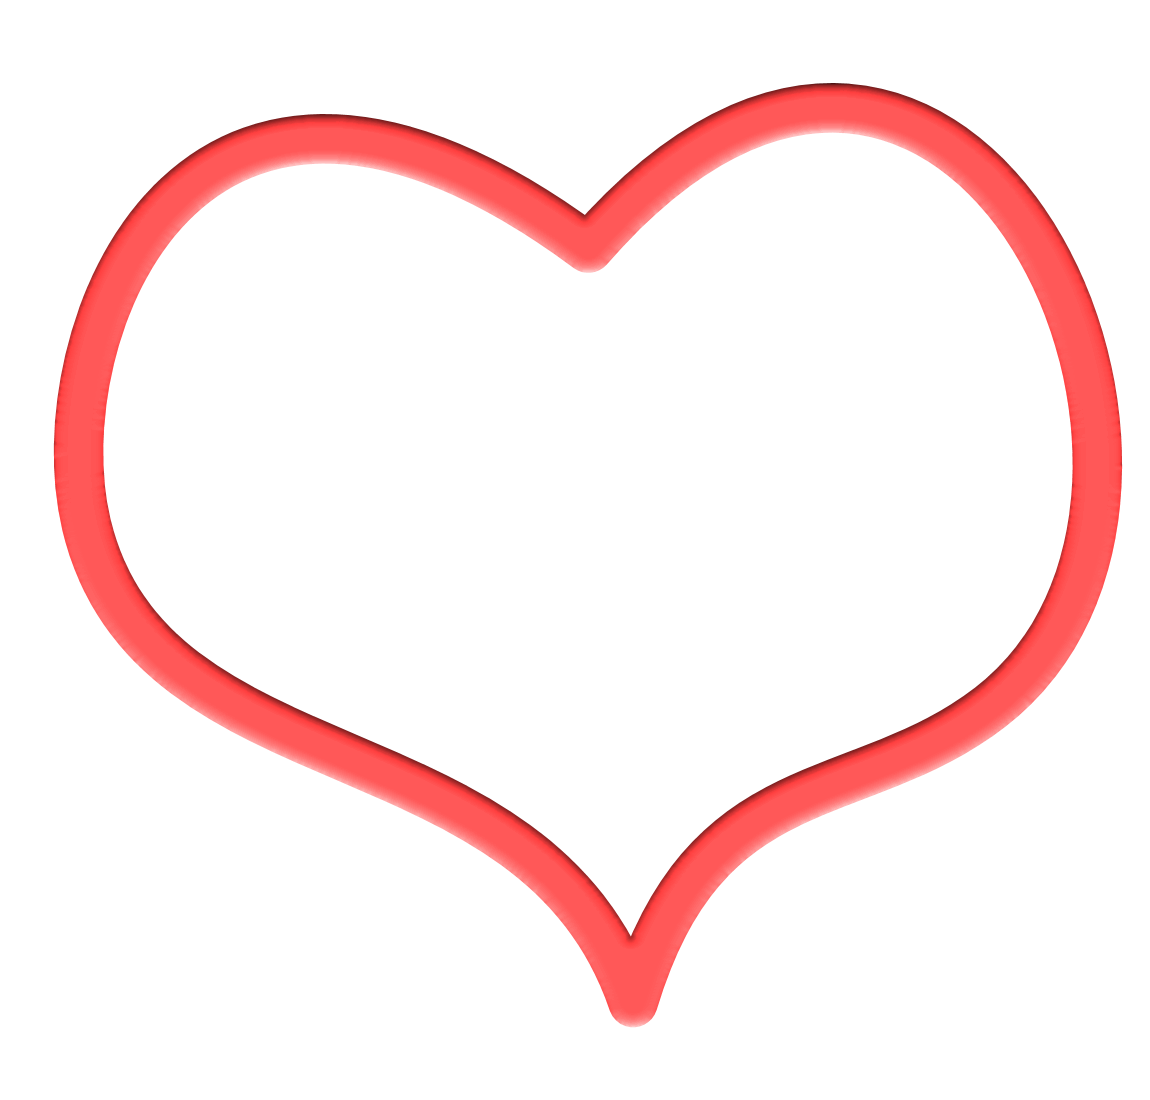 12 Transparent Heart Clip Art   Free Cliparts That You Can Download To